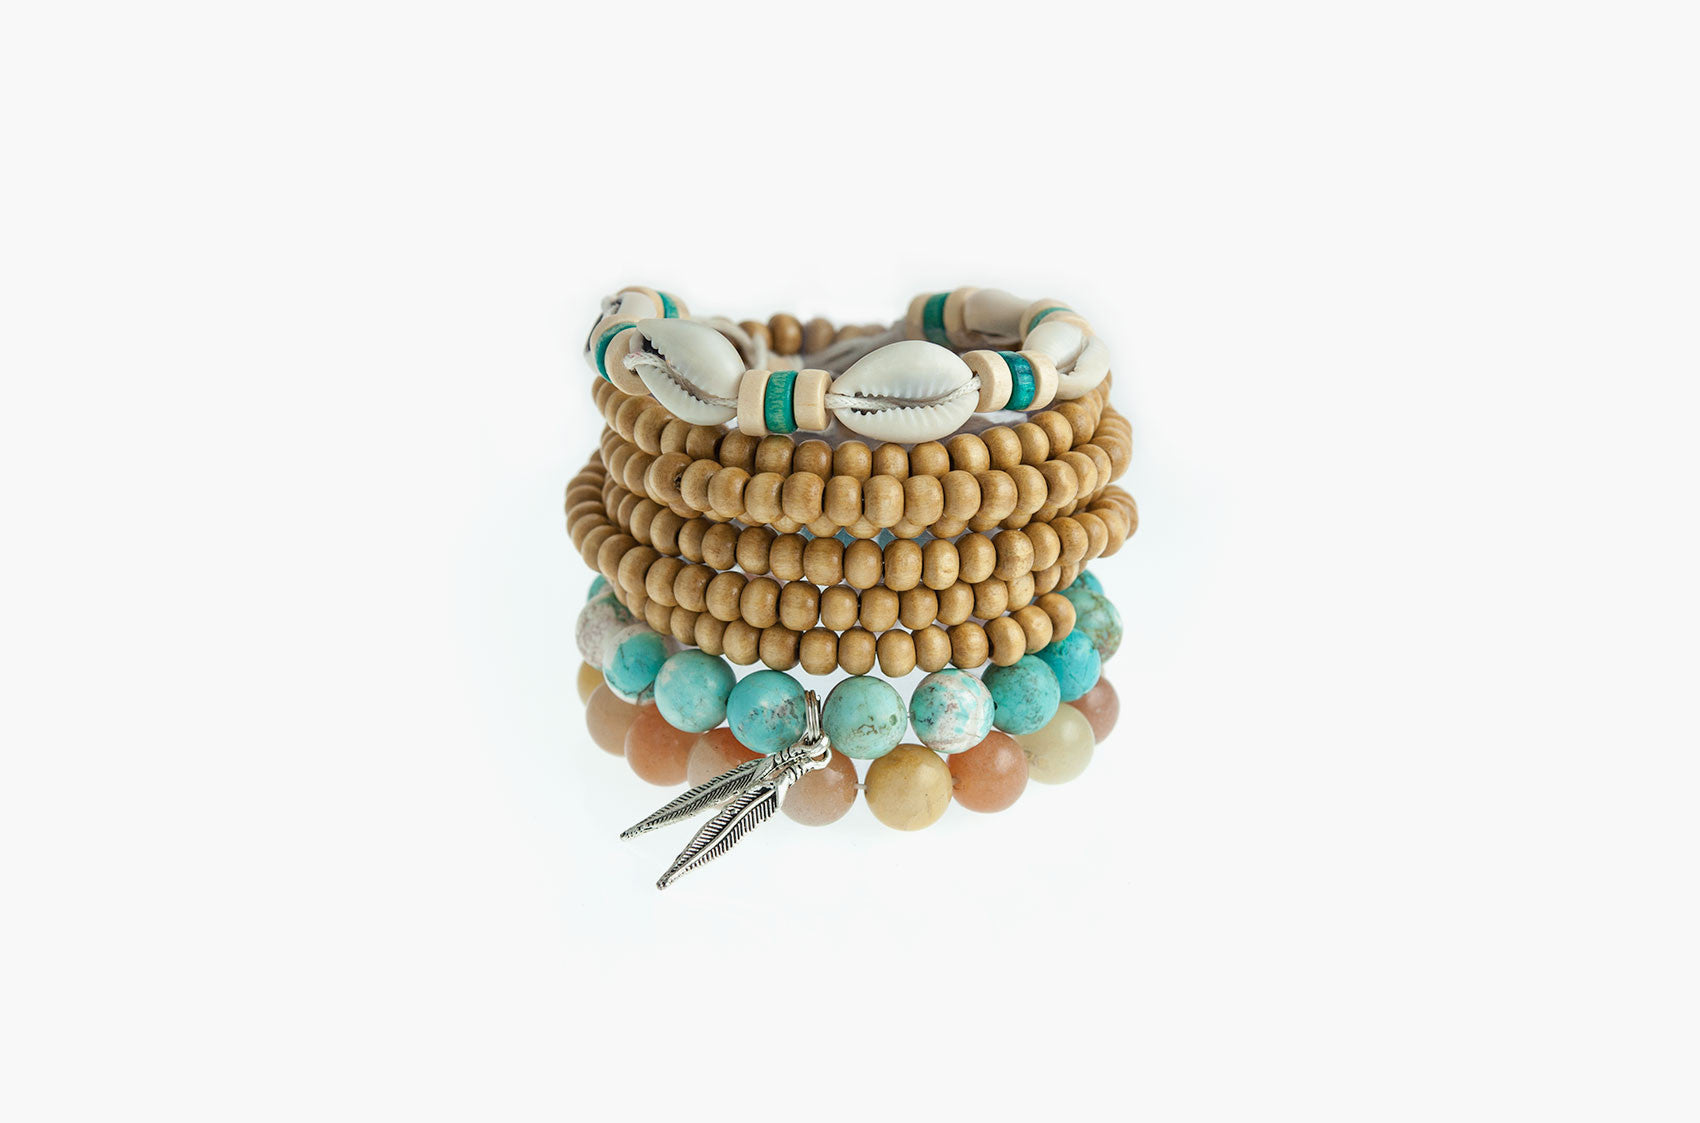 Stacked or Separate Bracelet Collection No. 5